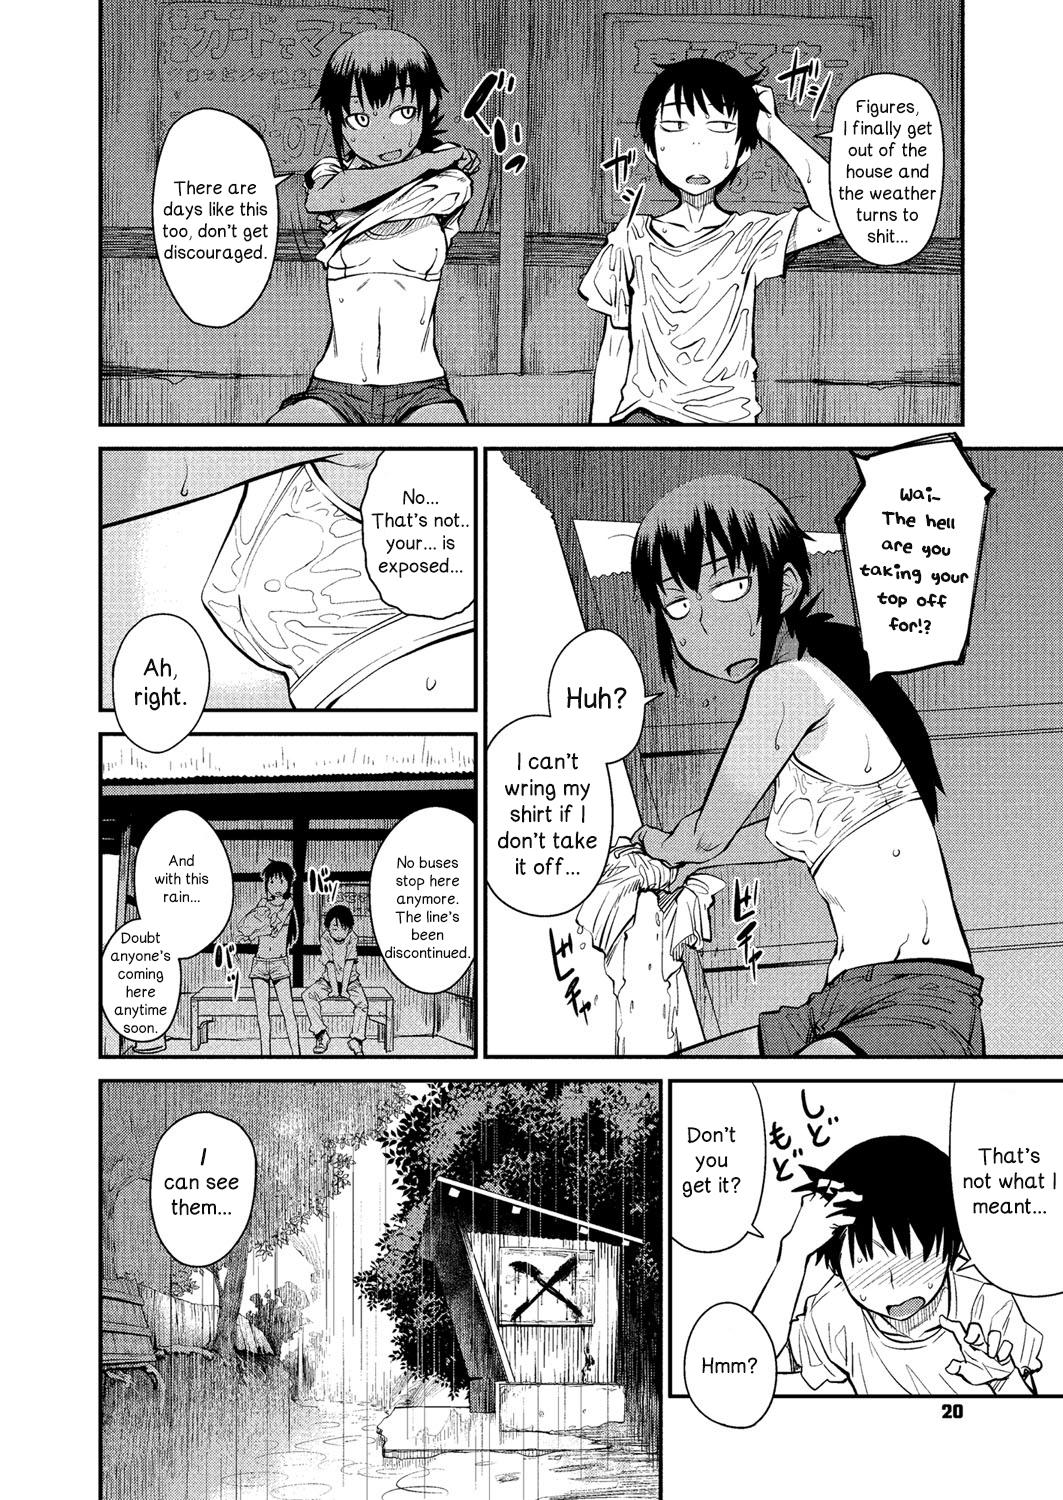 New Natsu no Bus-tei | Summertime Bus Stop Watersports - Page 6